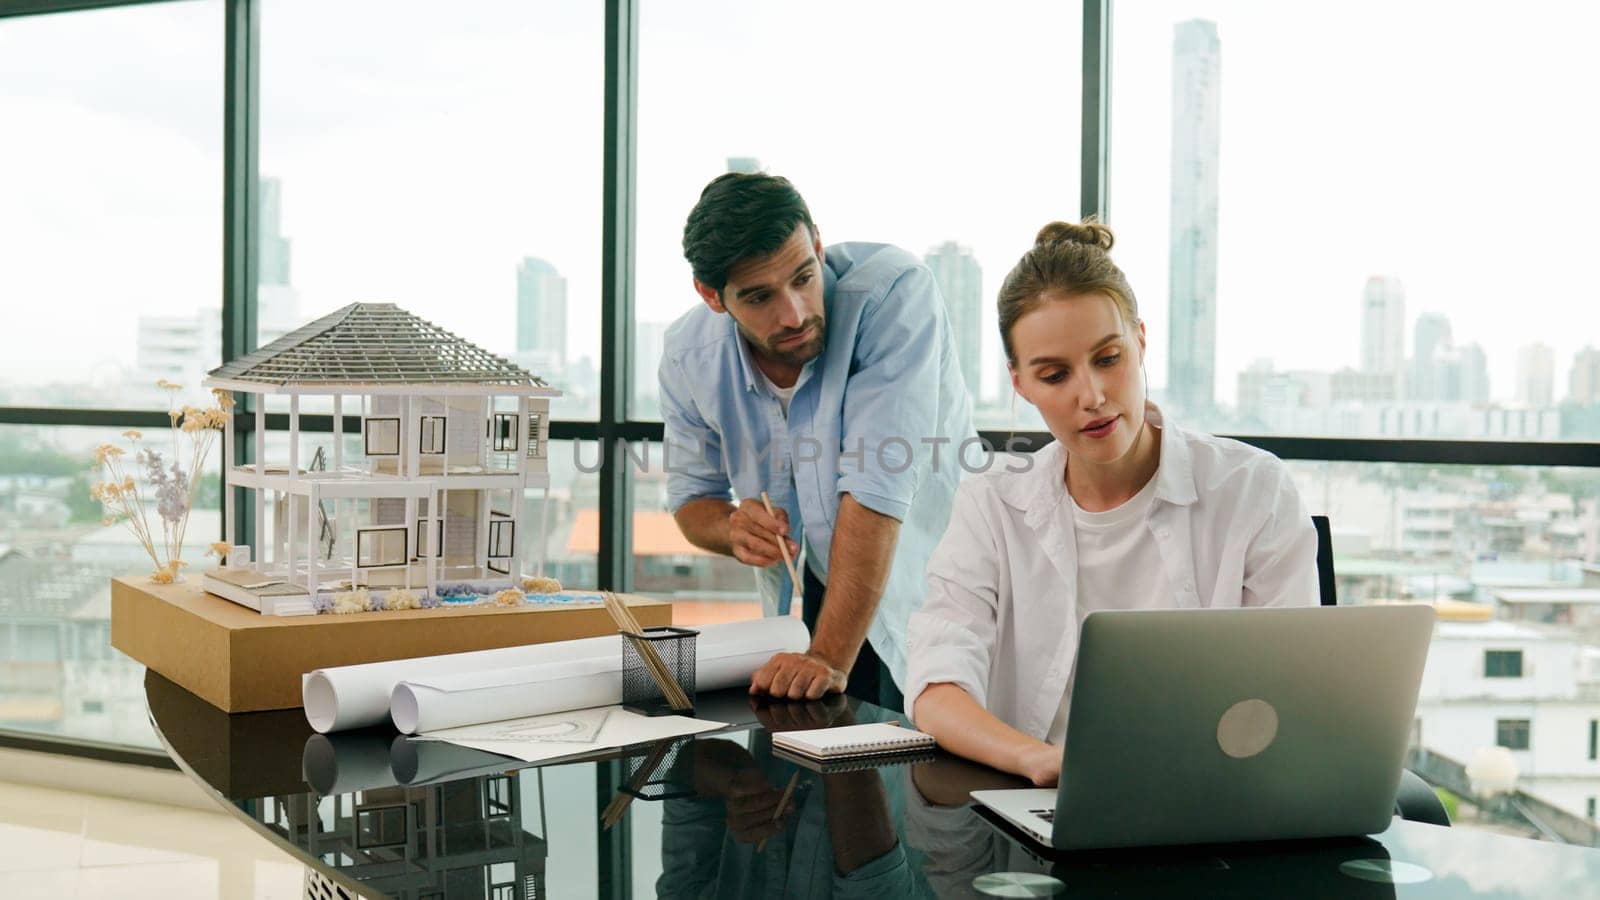 Smart architect engineer inspect house model while colleague using laptop analysis data. Professional designer team working together to design house model construction at modern office. Tracery